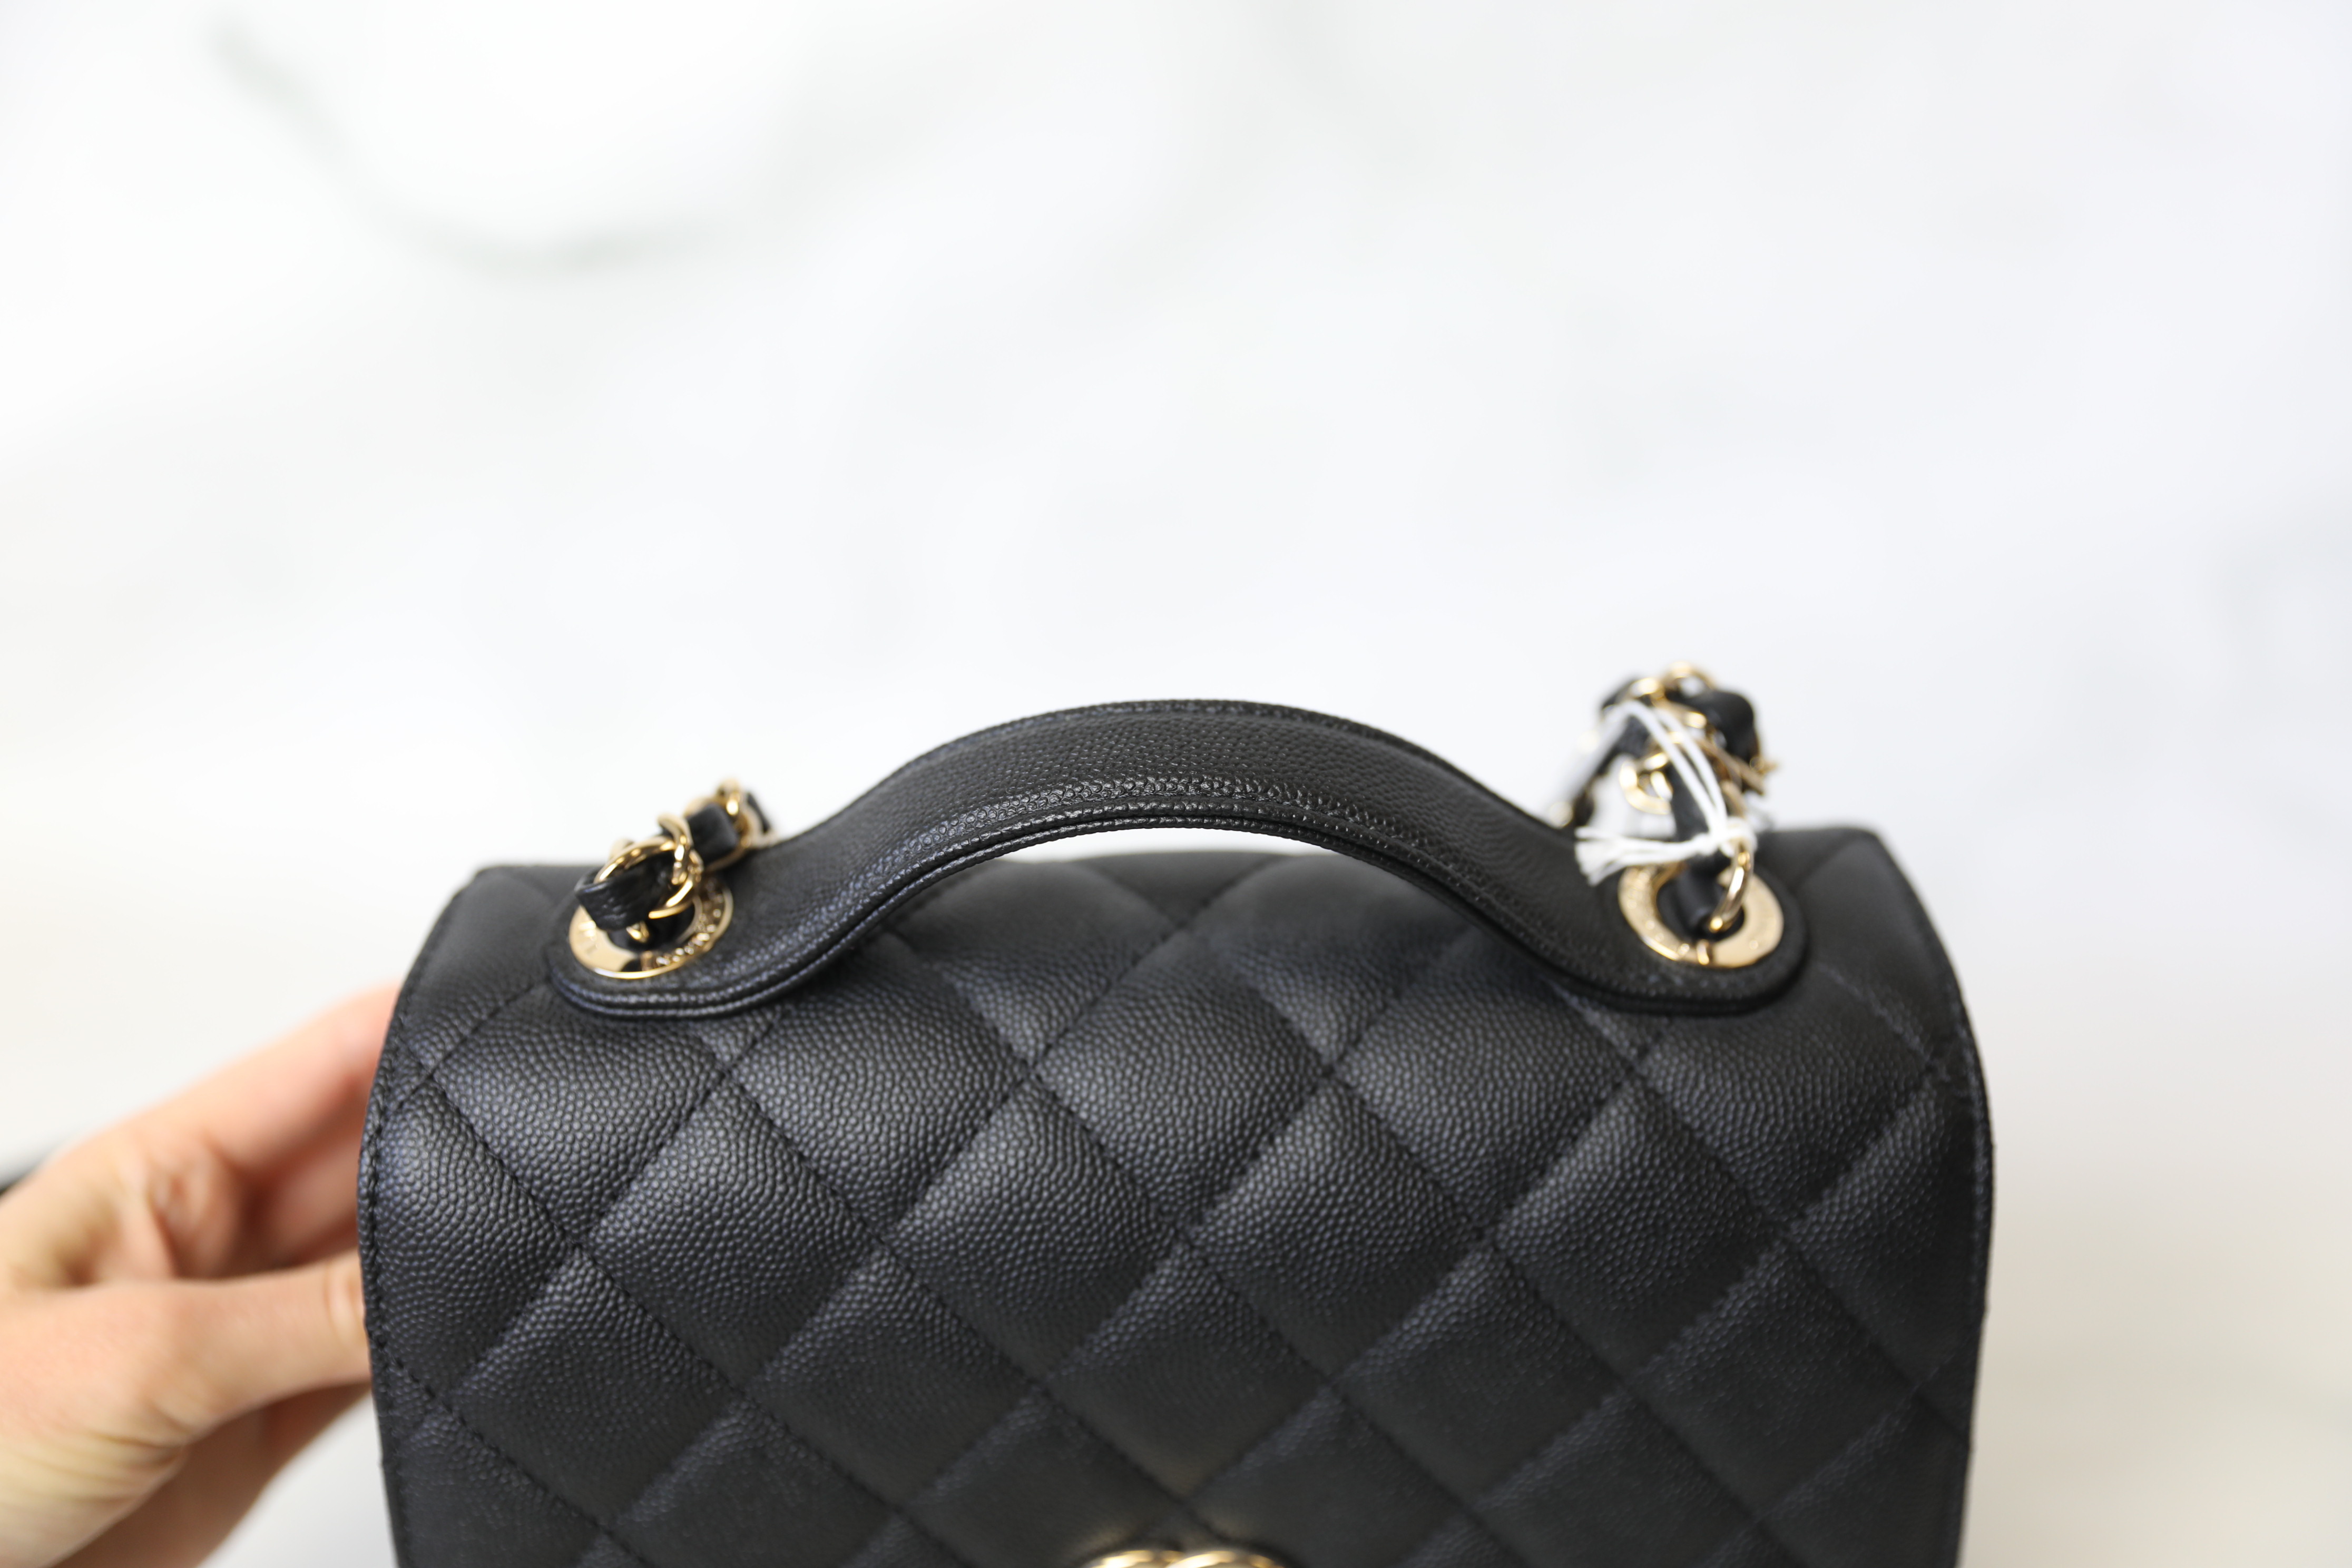 Chanel Business Affinity Medium, Black Caviar Leather With Gold Hardware,  New in Dustbag WA001 - Julia Rose Boston